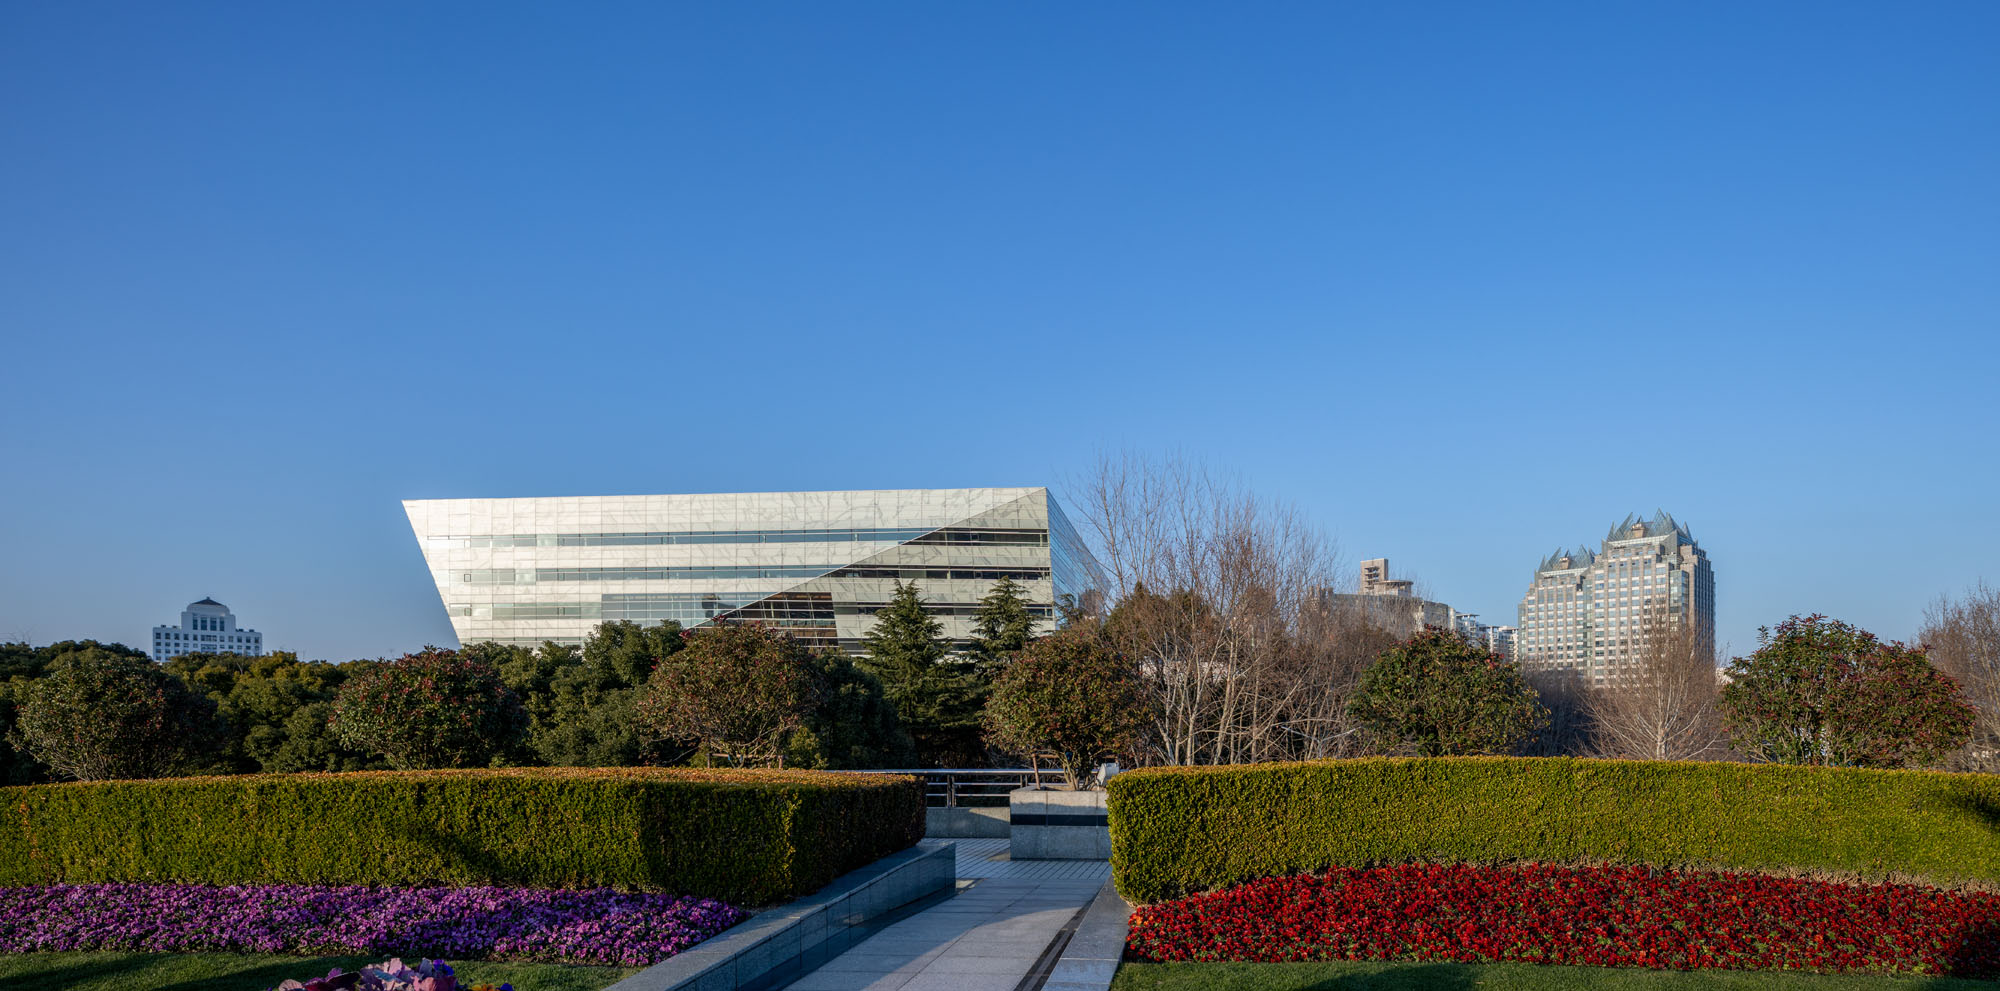 An exterior photograph of the shanghai library east